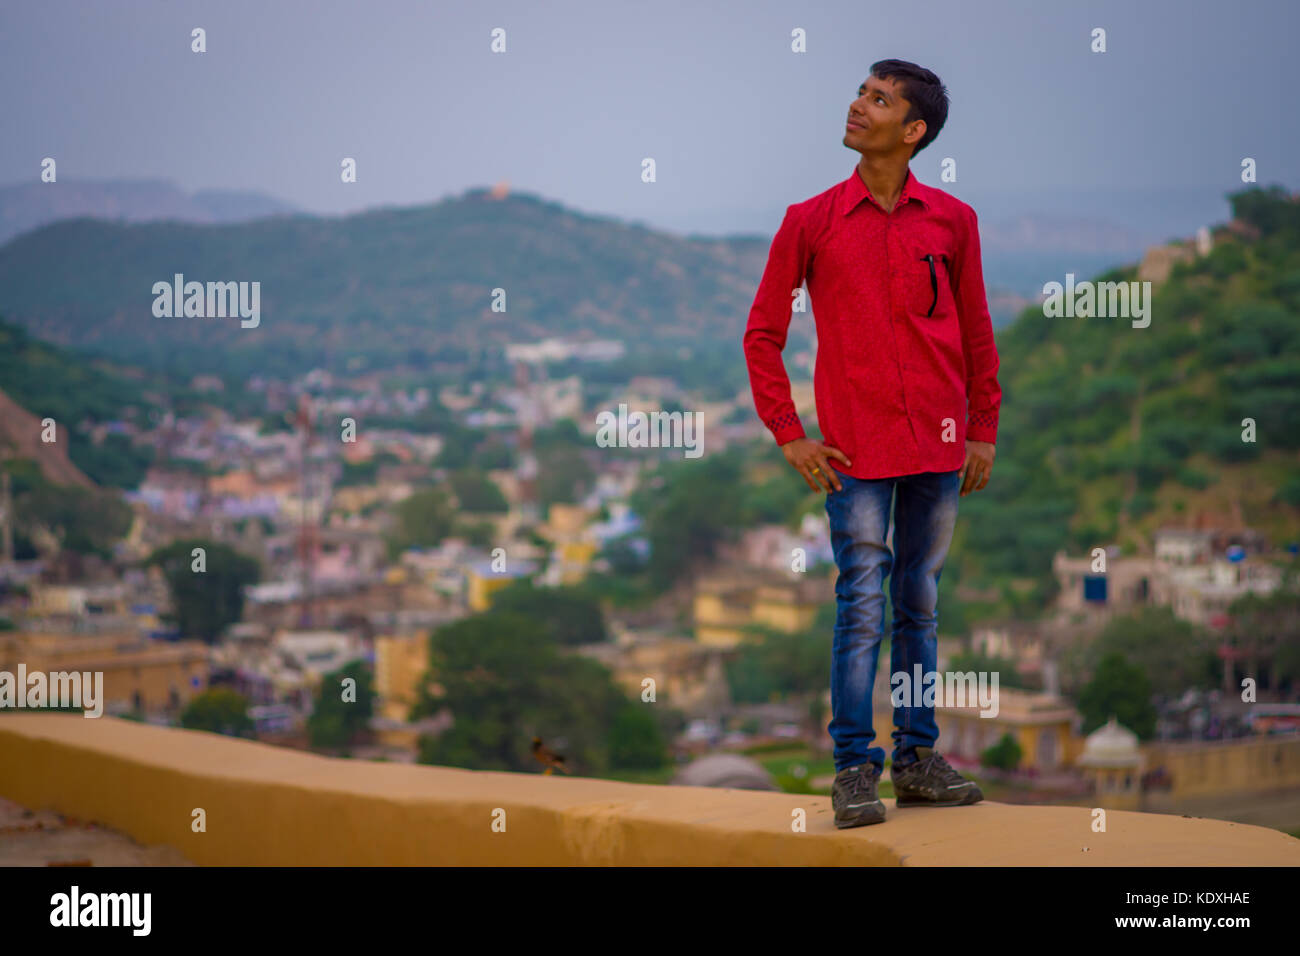 Amber, India - September 19, 2017: Close up of an unidentified Indian man wearing a red t-shirt a jean pants with city behid in the city of Amber, India Stock Photo